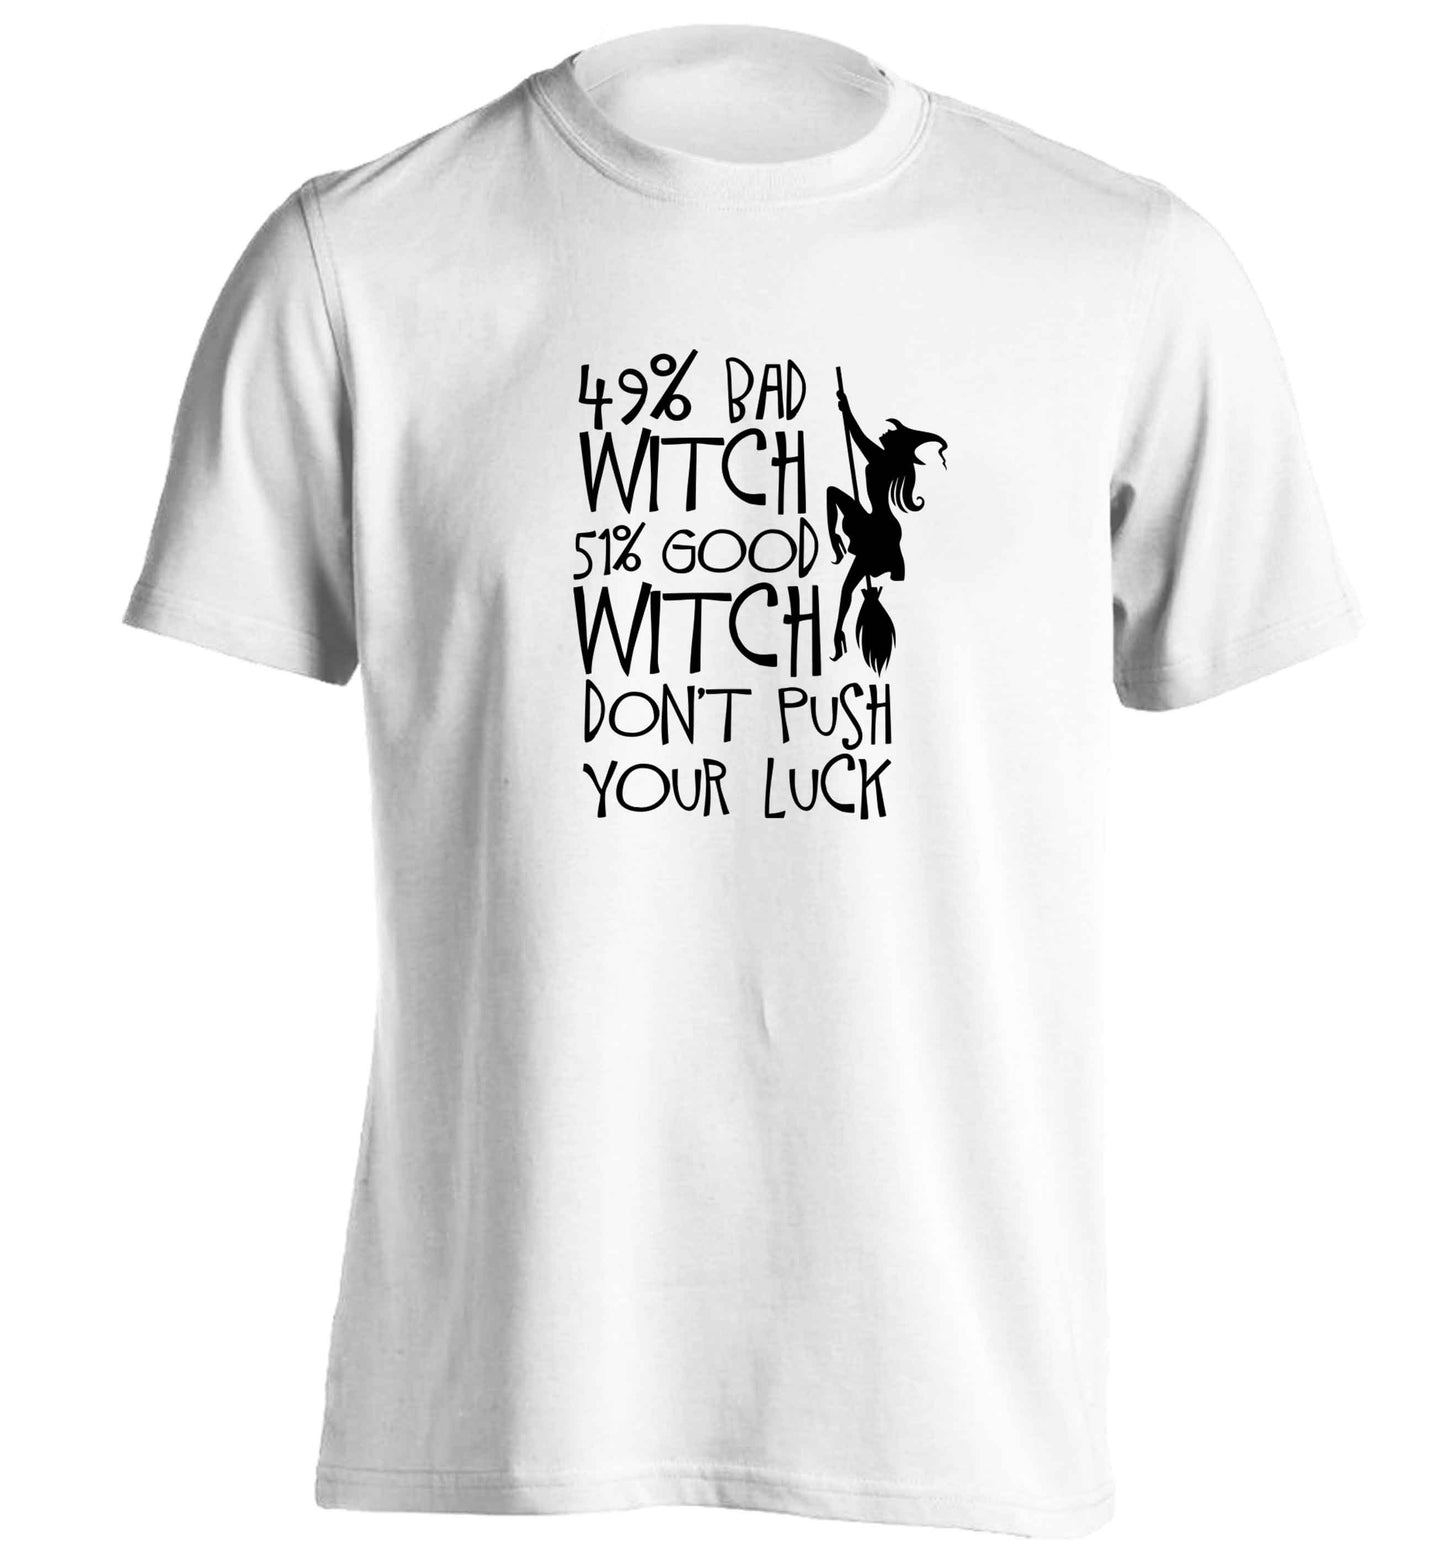 49% bad witch 51% good witch don't push your luck adults unisex white Tshirt 2XL